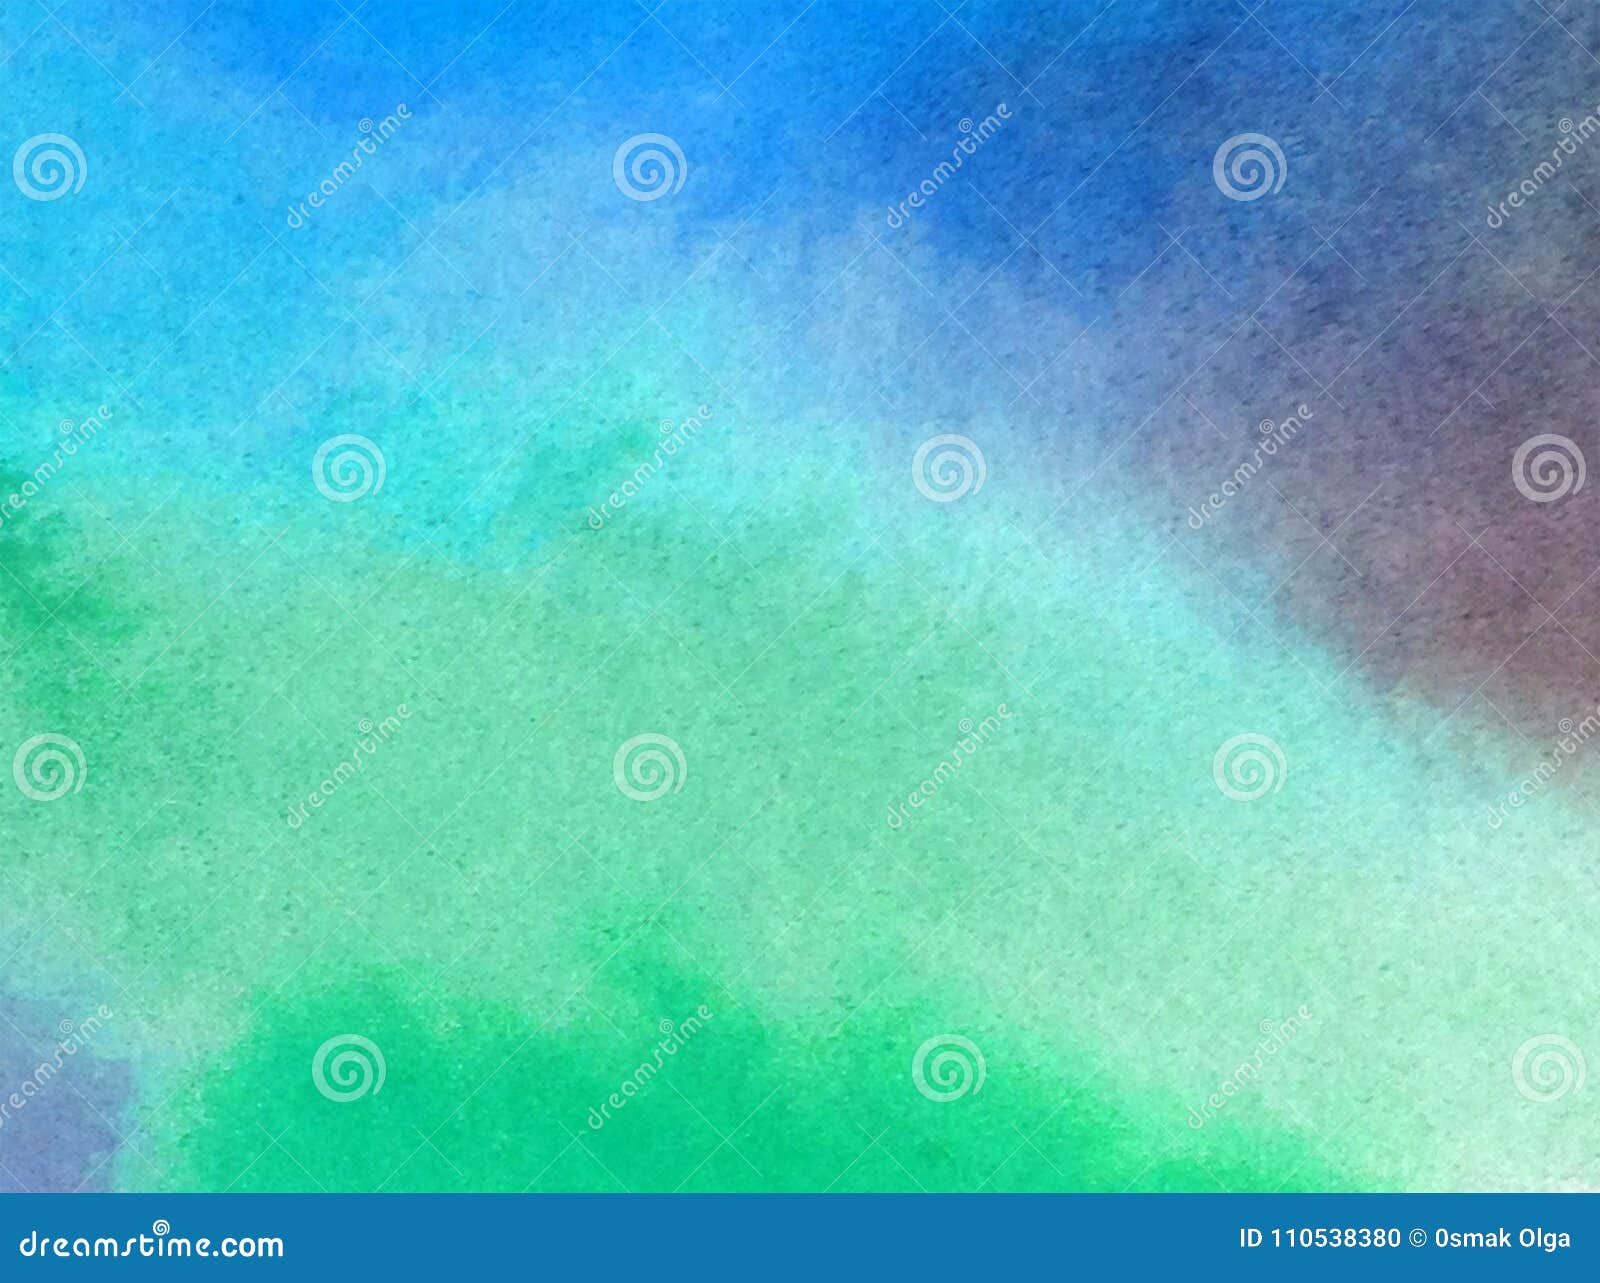 Watercolor Art Abstract Background Fresh Beautiful Sky Morning Sunrise ...